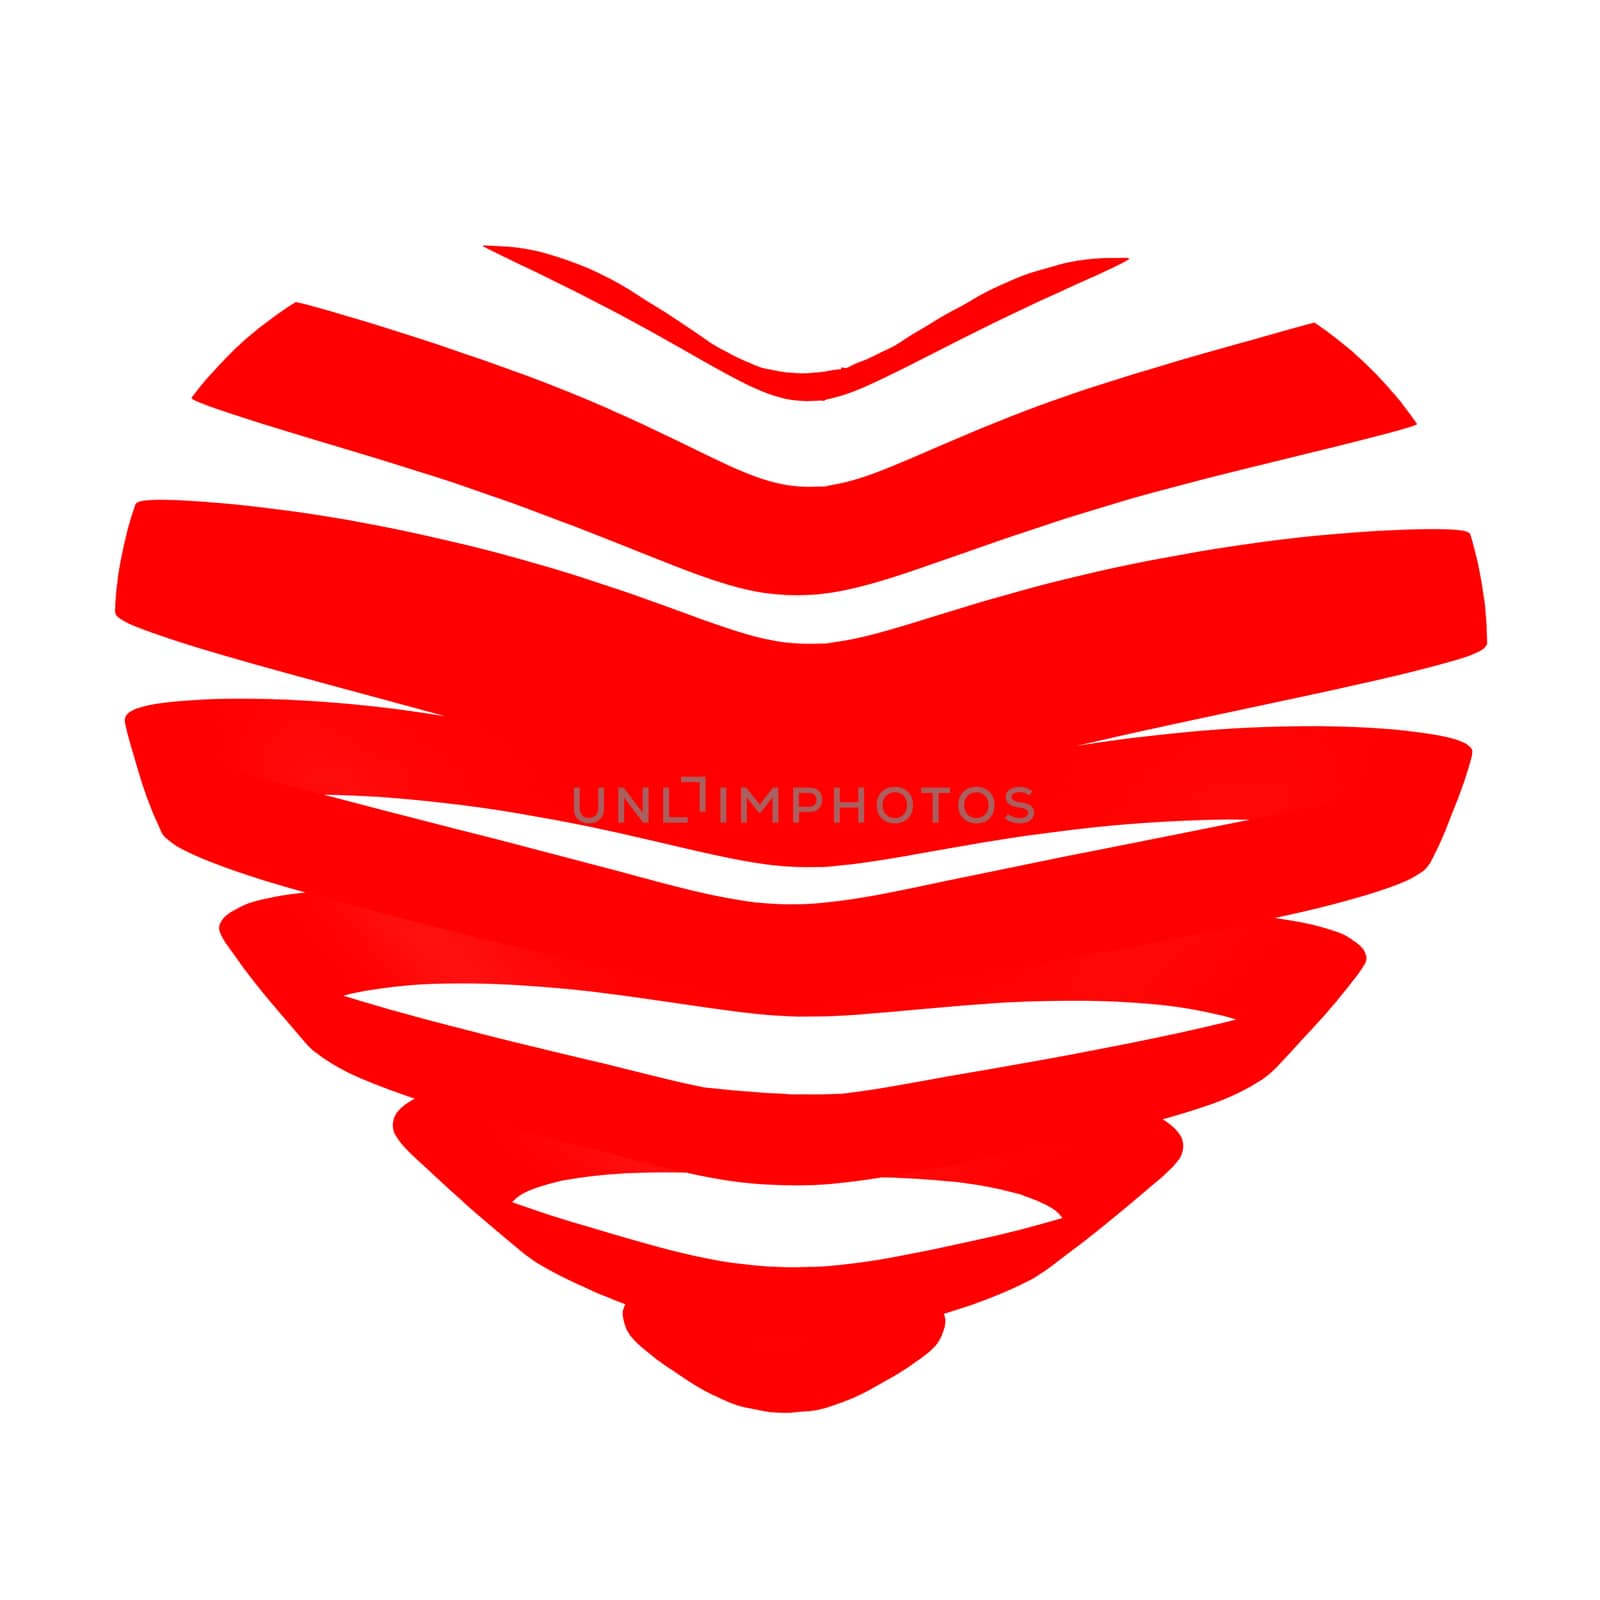 3d beautiful red glossy heart of the bands on a white background